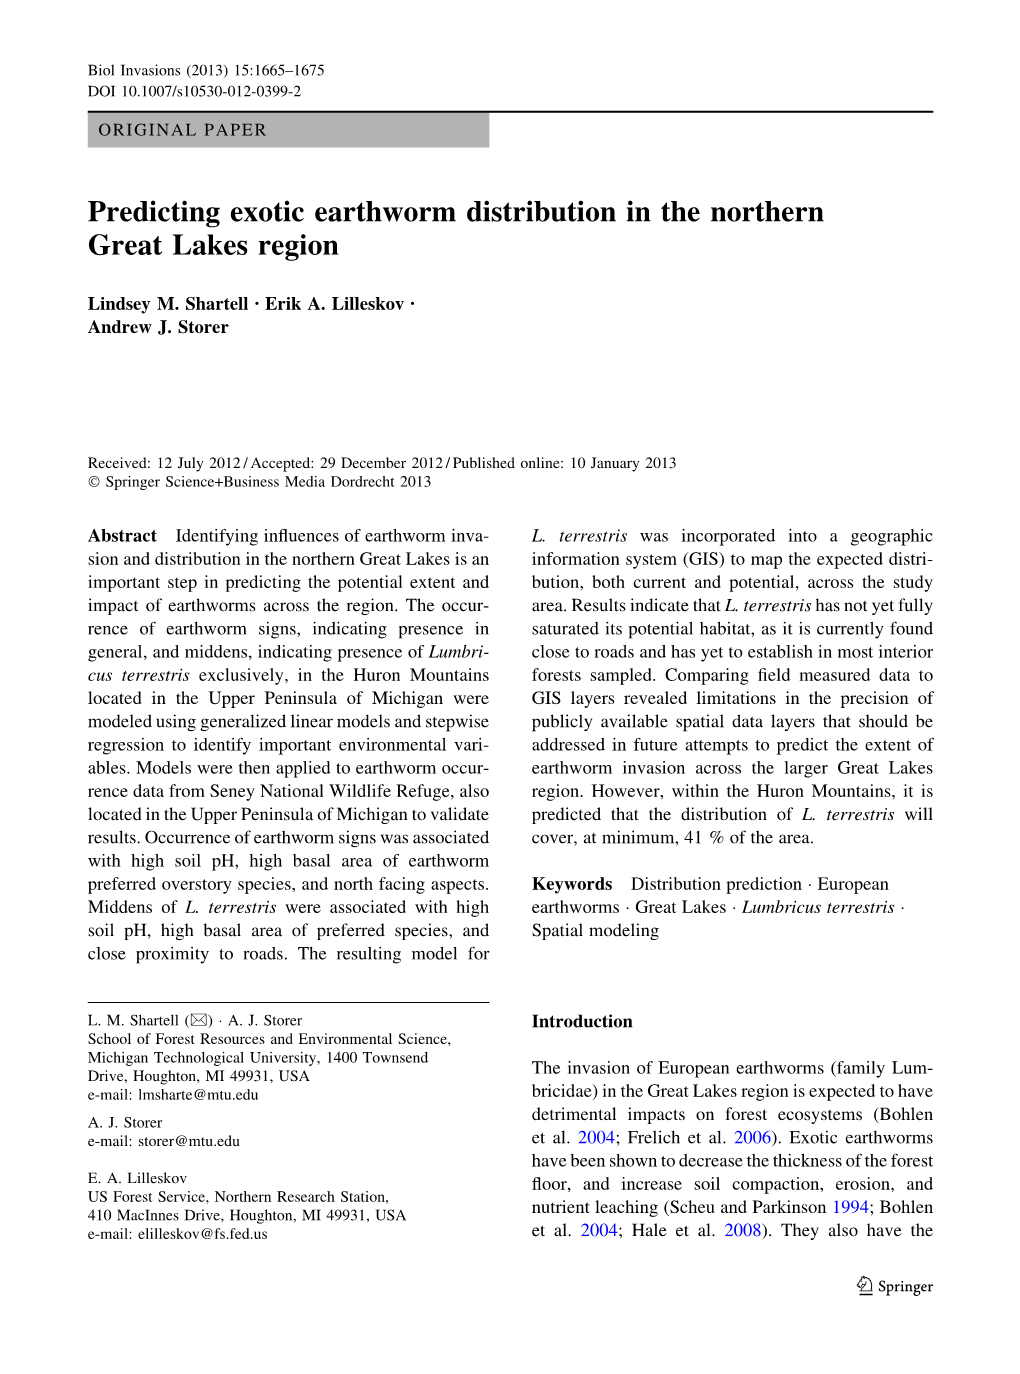 Predicting Exotic Earthworm Distribution in the Northern Great Lakes Region